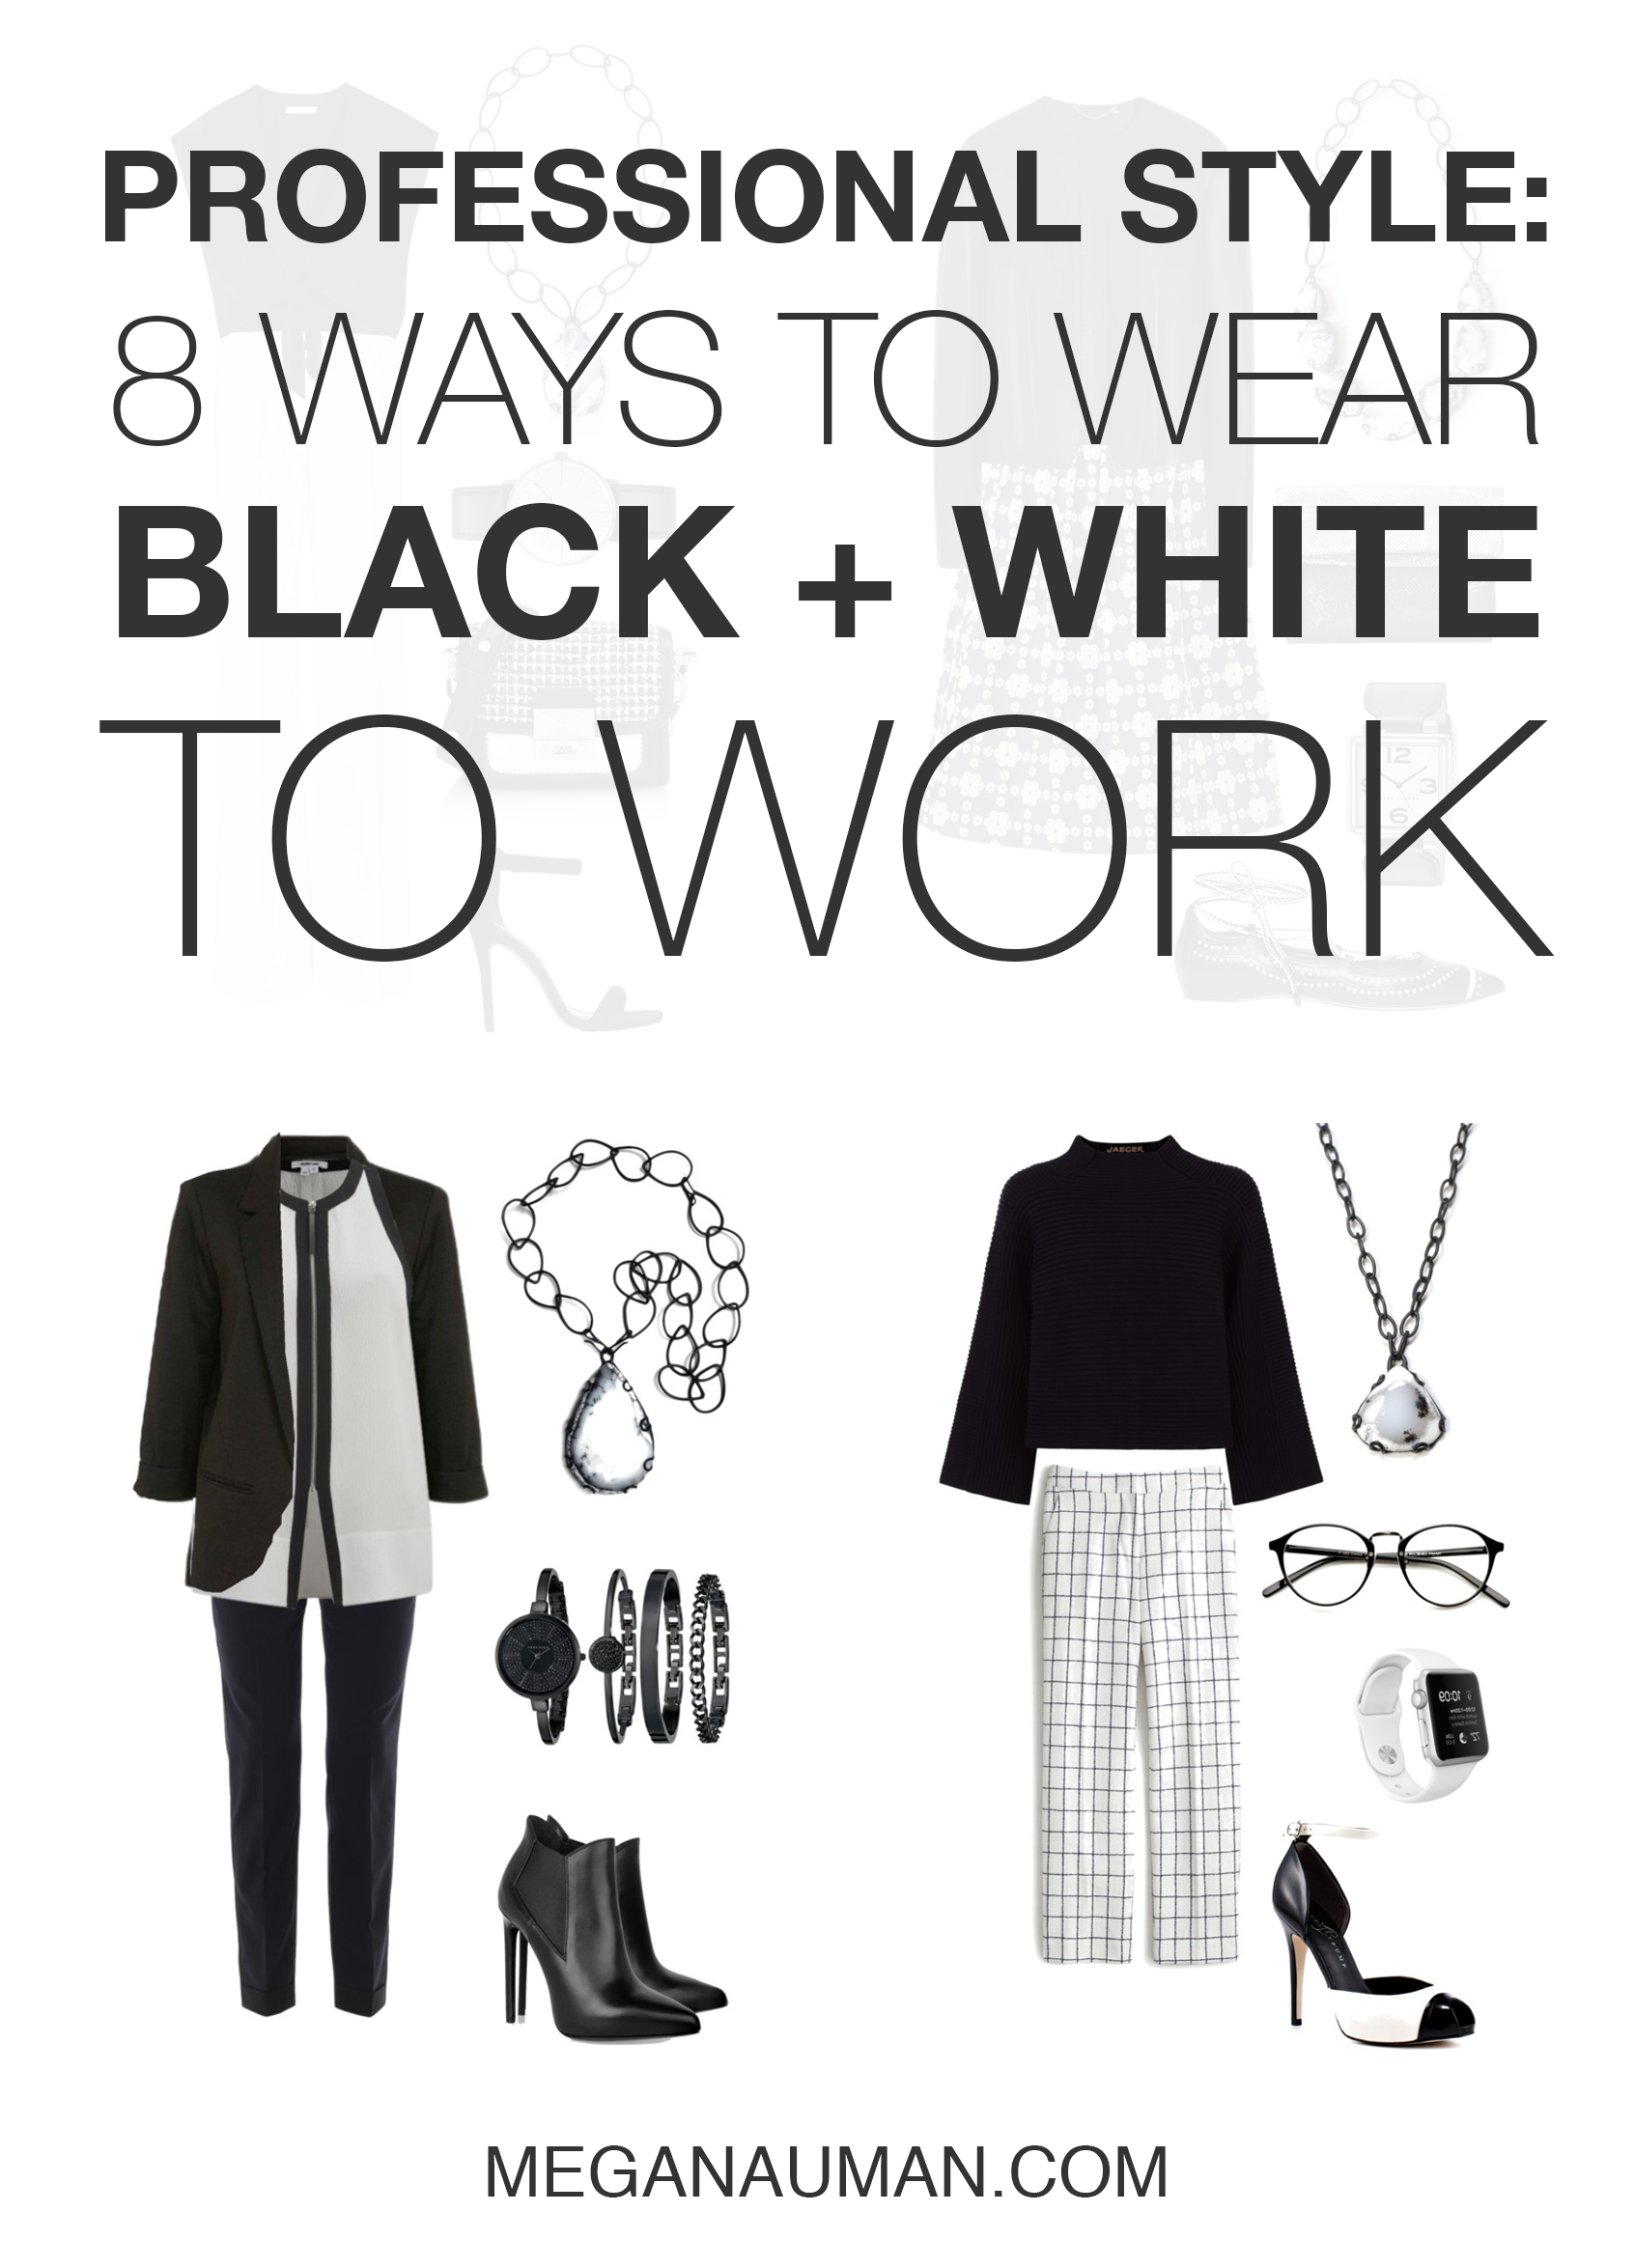 professional style: 8 chic and stylish ways to wear black and white to work // click through for outfit ideas